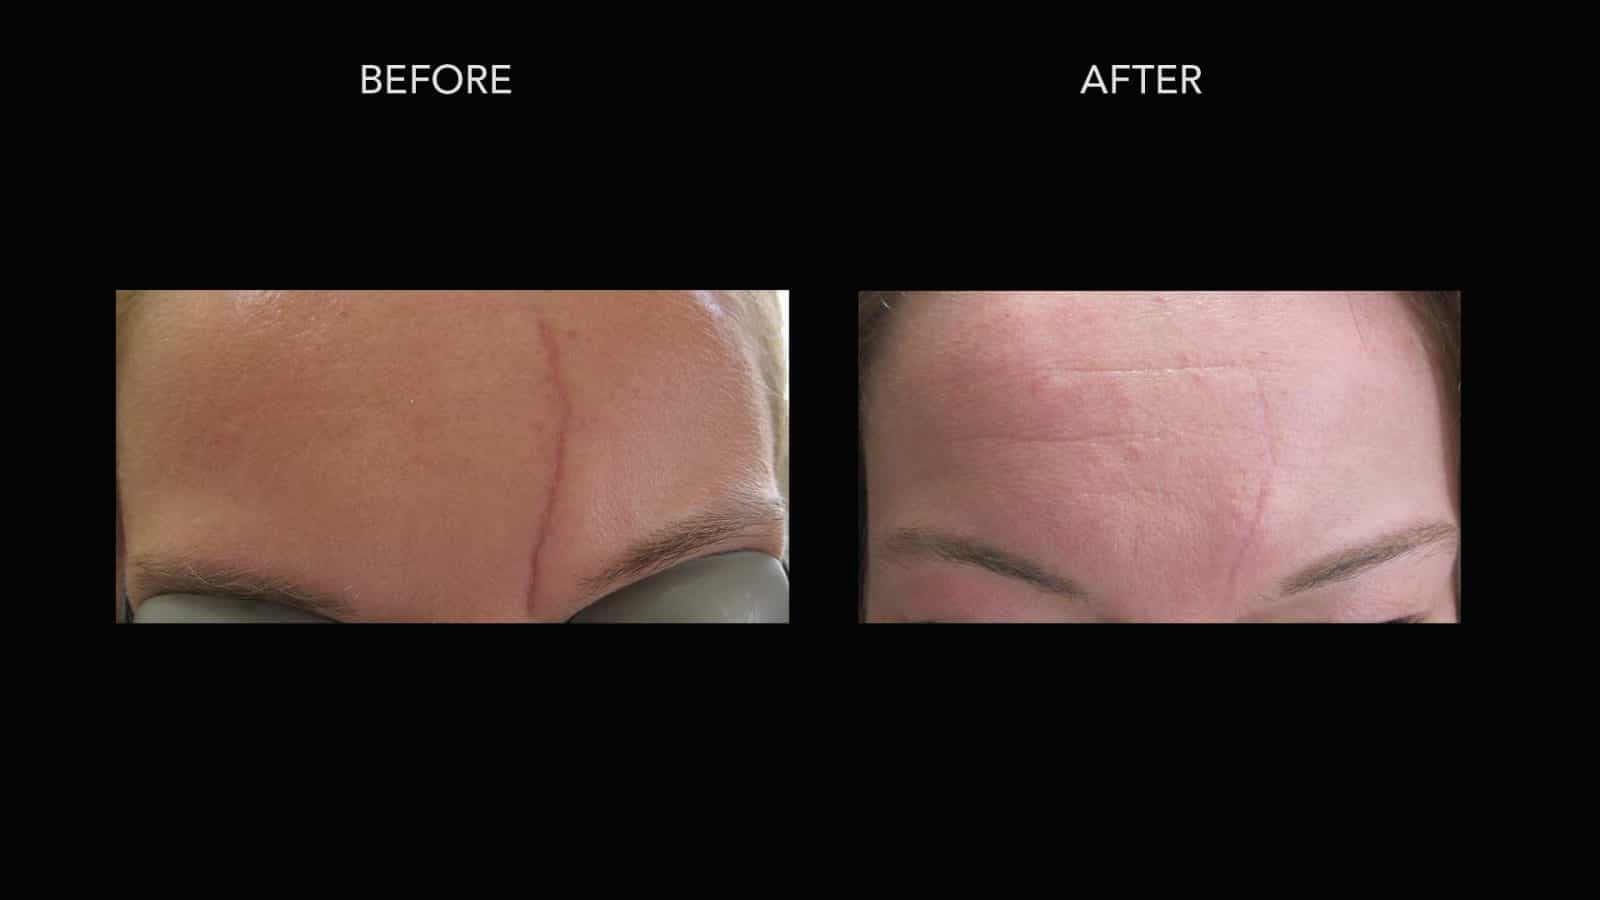 Scar Treatments Before and After Photos | DermMedica